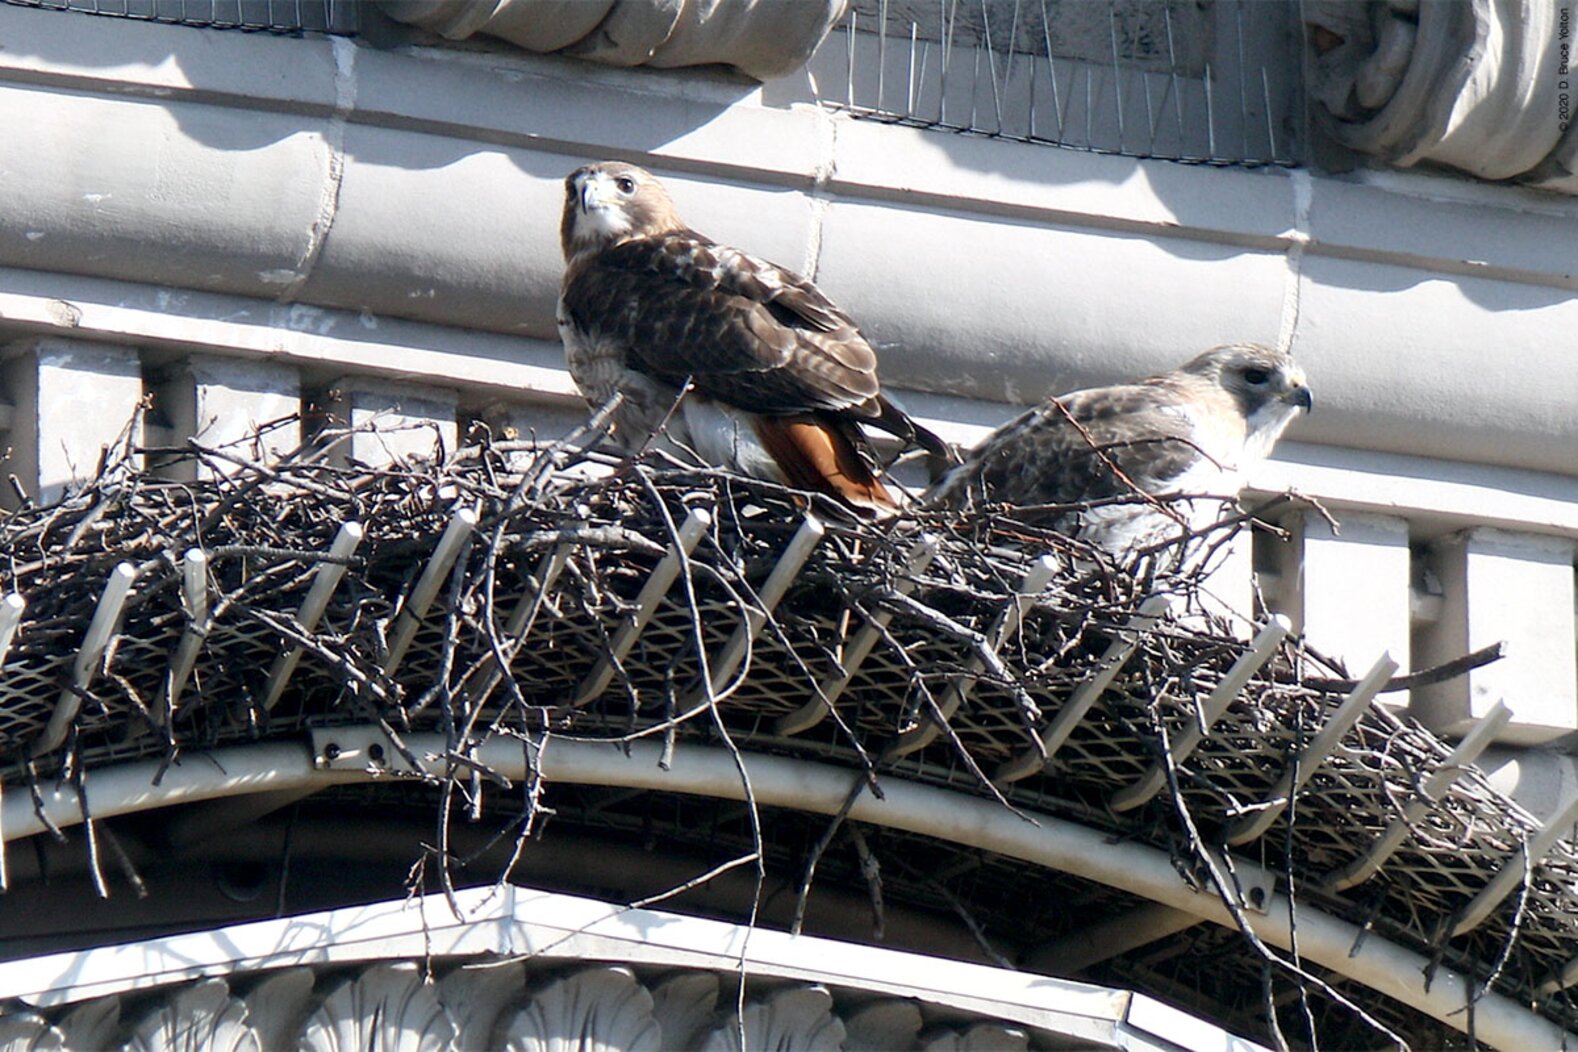 Octavia and Pale Male (or a similarly plumaged red-tail, perhaps), March 2020. Photo: <a href="https://www.urbanhawks.com/" target="_blank">D. Bruce Yolton</a>